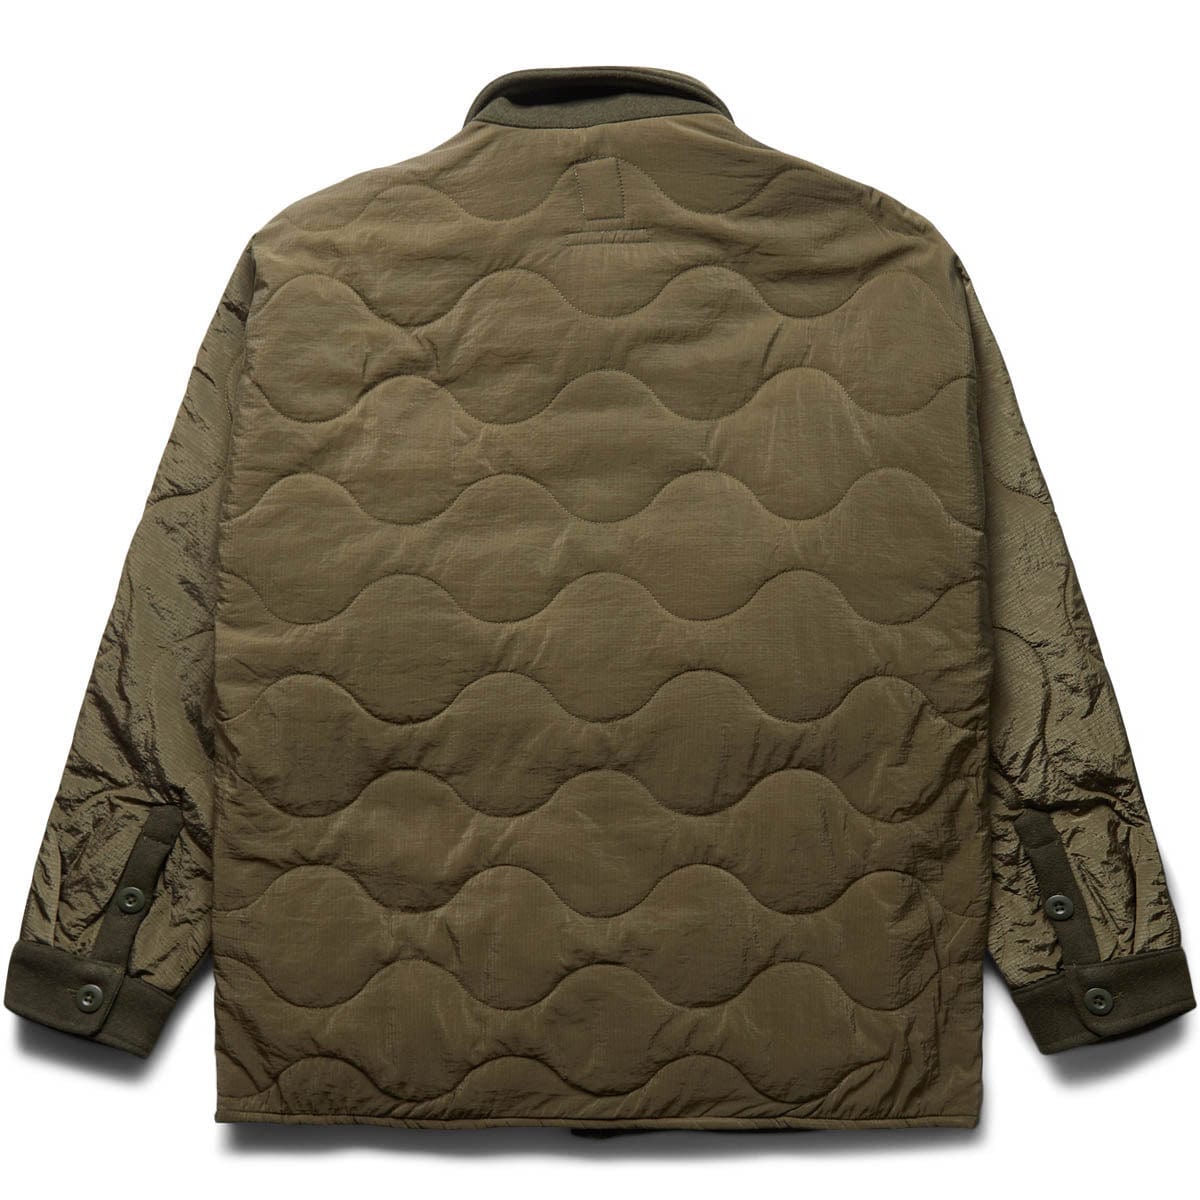 Liberaiders Outerwear QUILTED UTILITY SHIRT JACKET